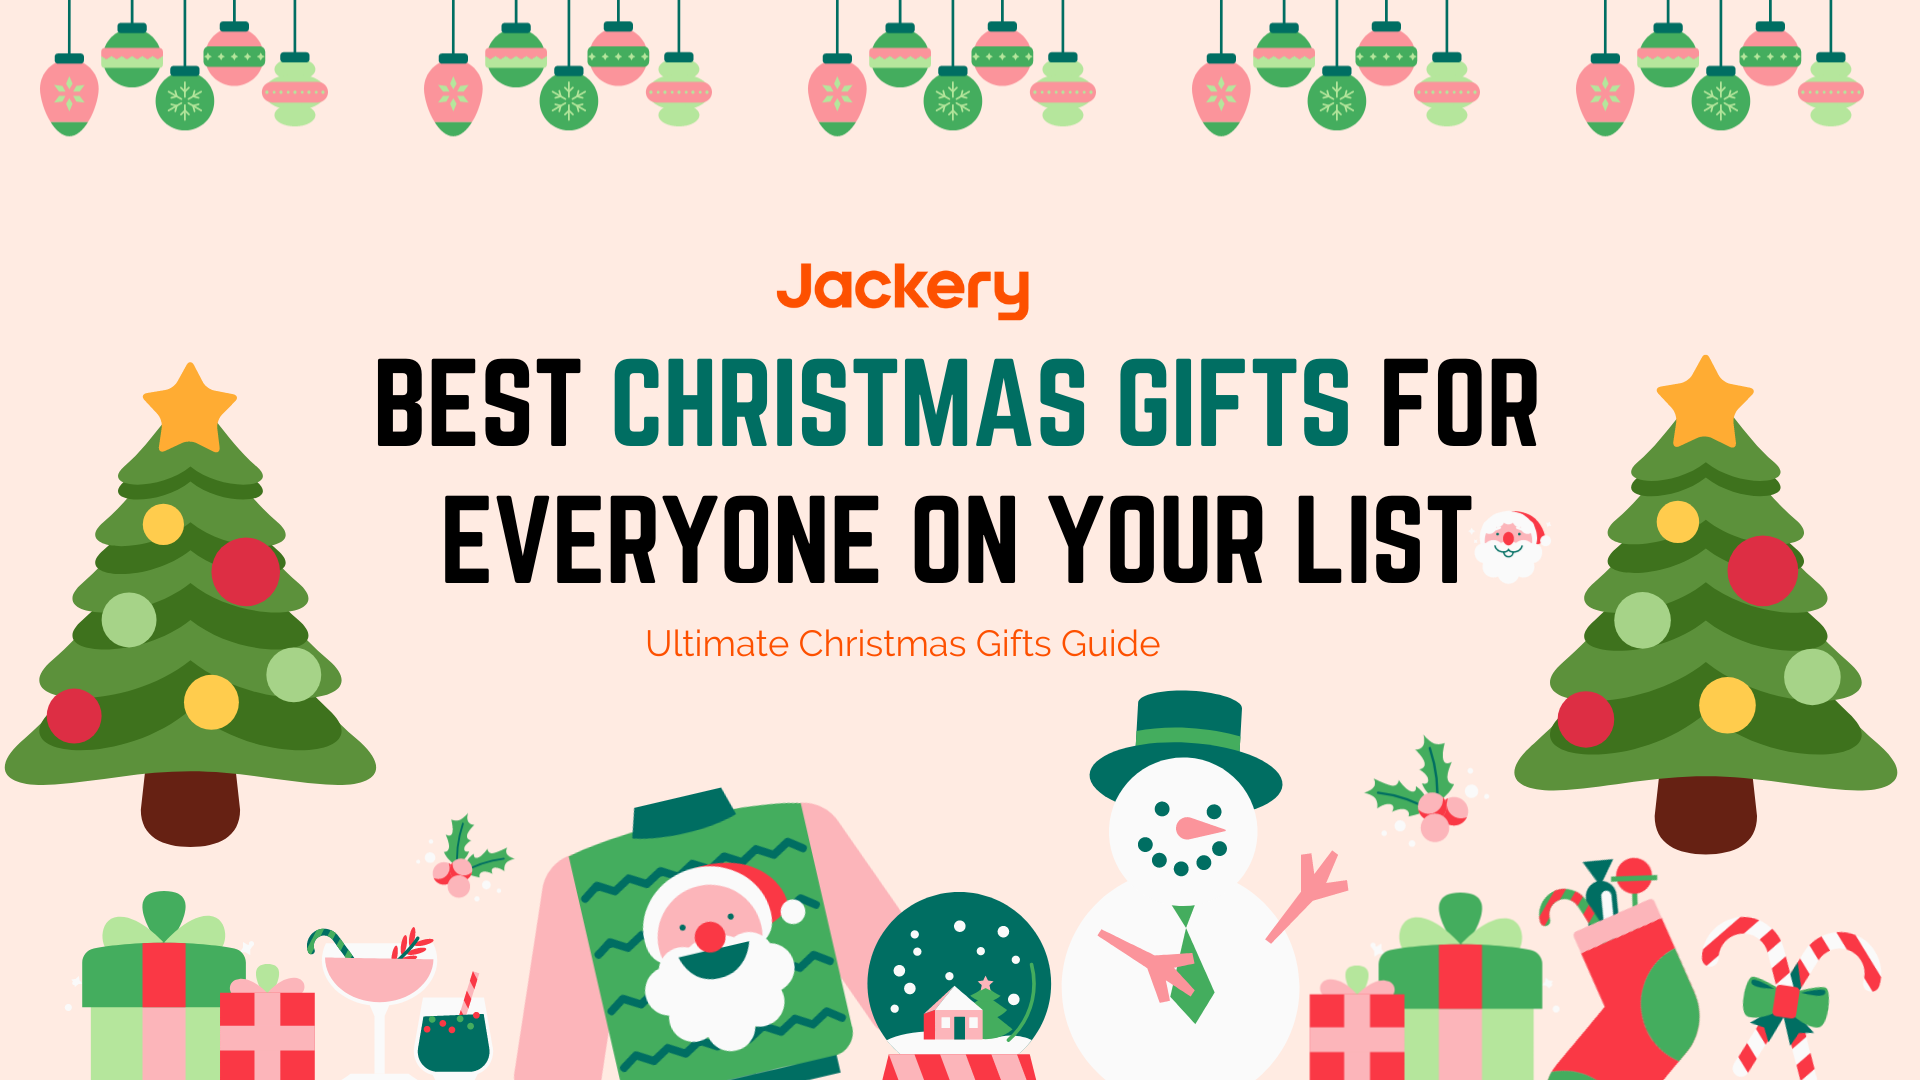 Best Christmas Gifts for Everyone on Your List - Jackery